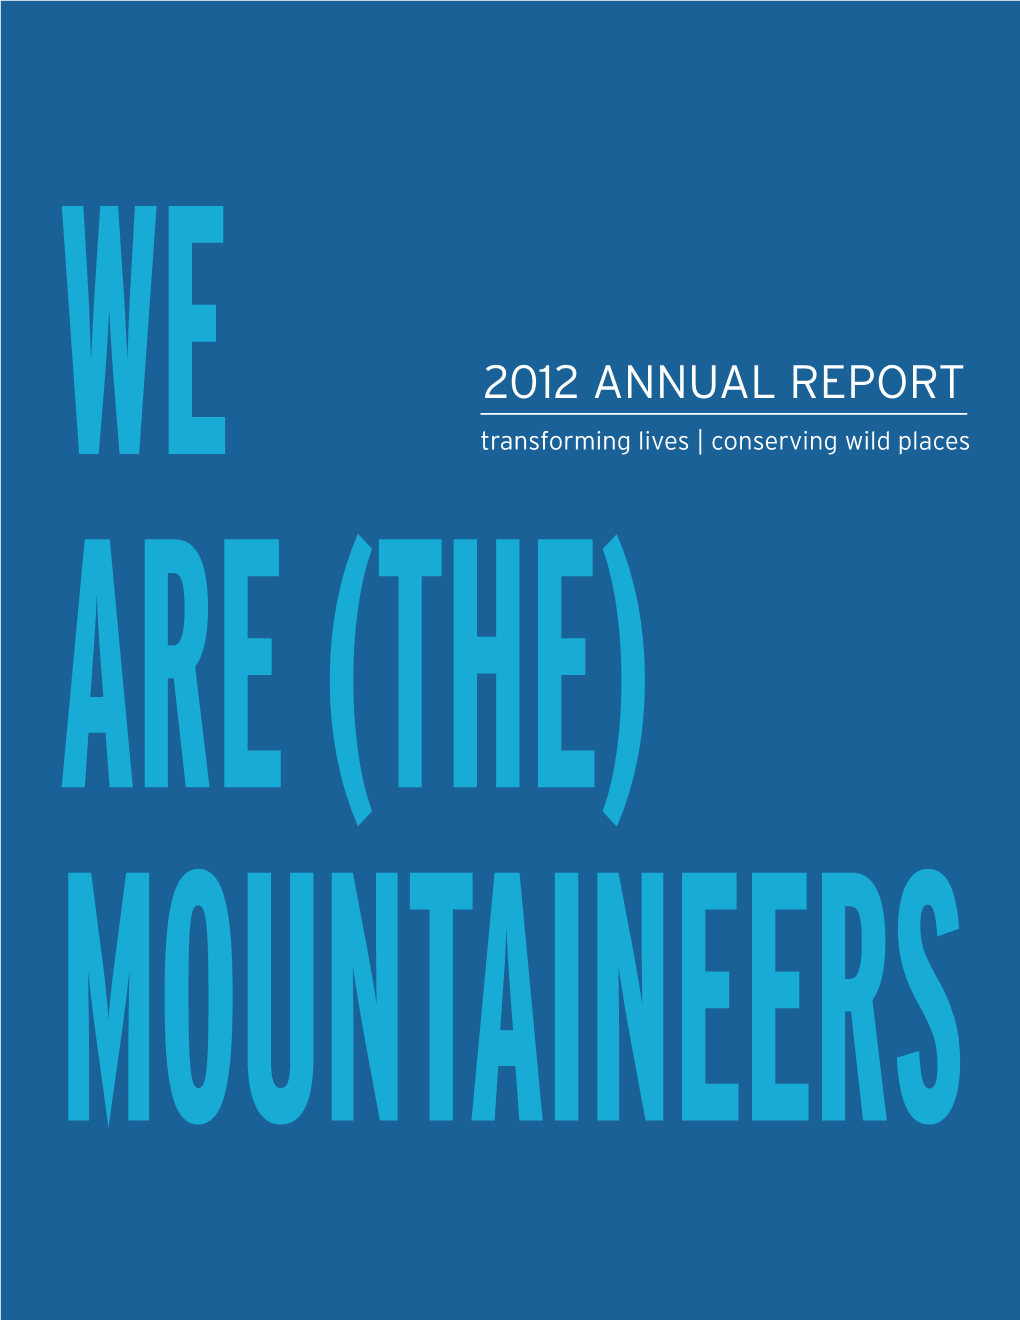 Discovery 2012 ANNUAL REPORT WE Transforming Lives | Conserving Wild Places ARE (THE)